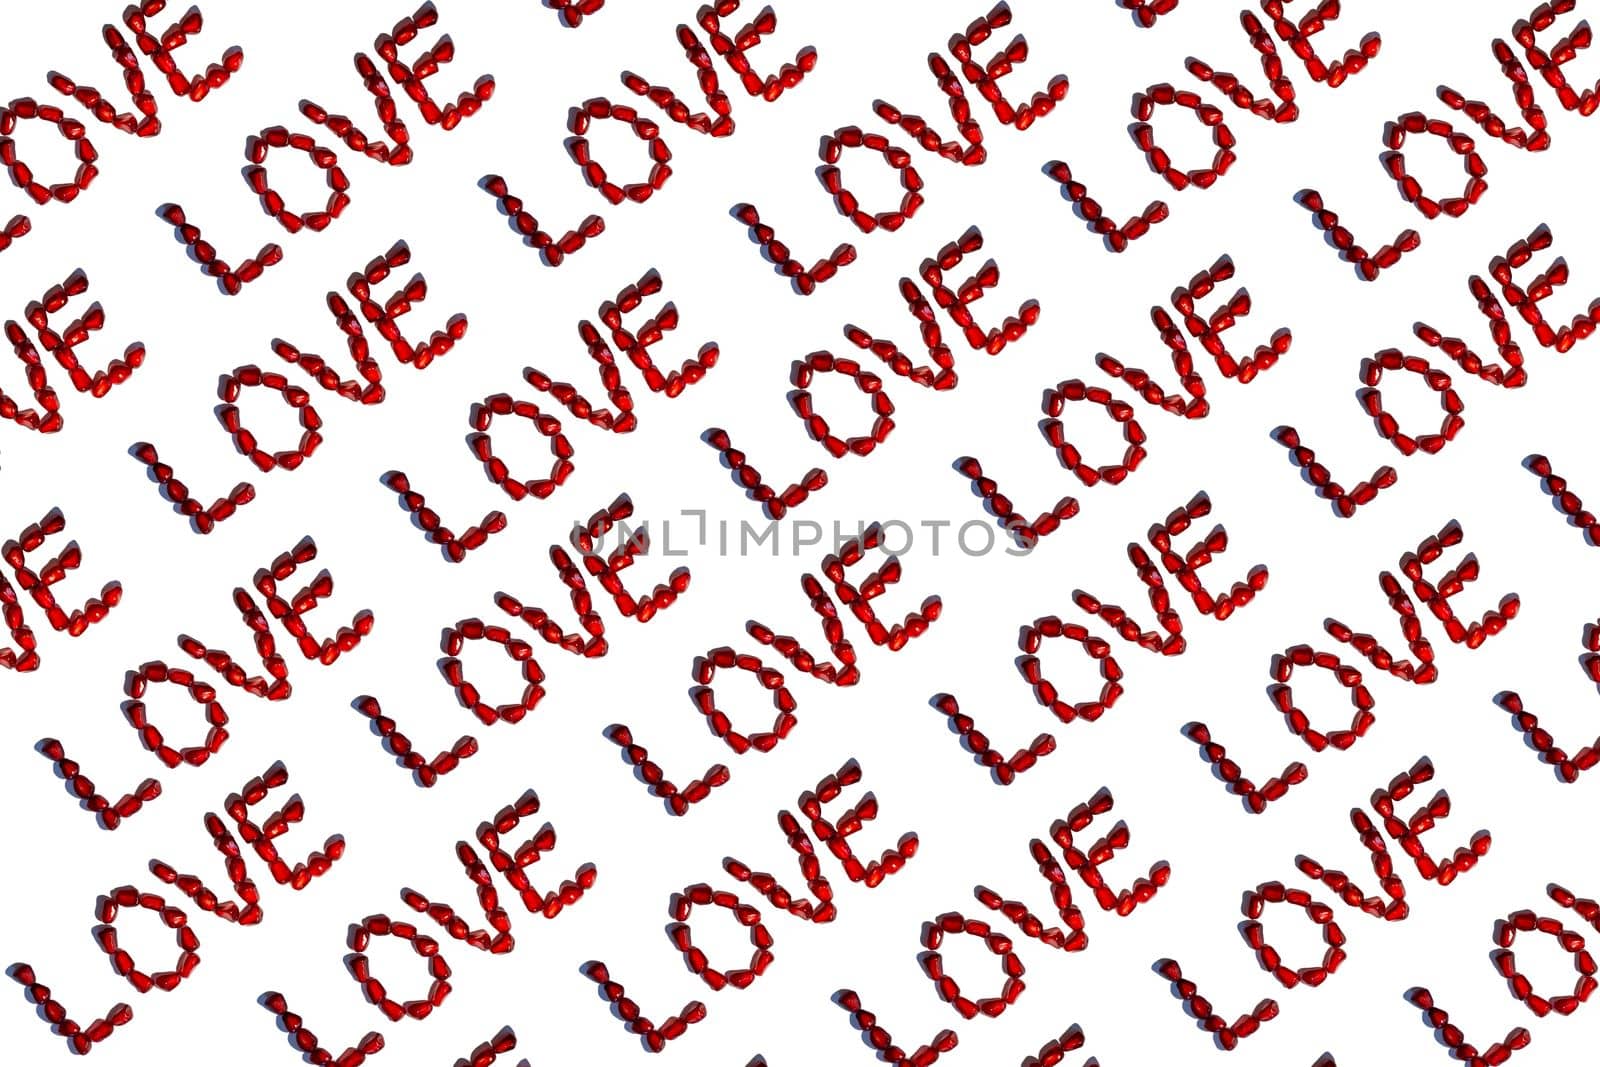 Love word from red pomegranate seeds. Valentine's day concept. Sign pattern. Isolated on white background